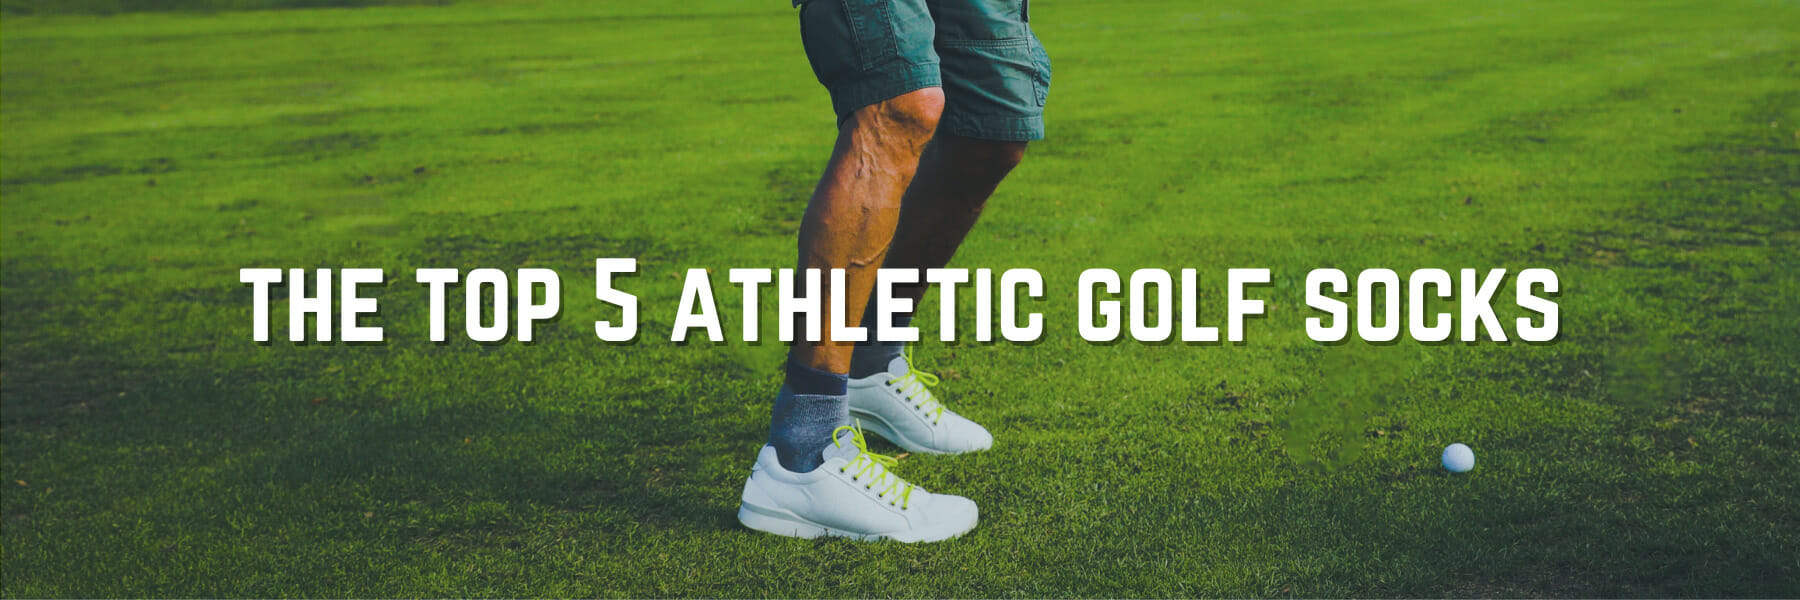 The Best Athletic Golf Socks For The Course